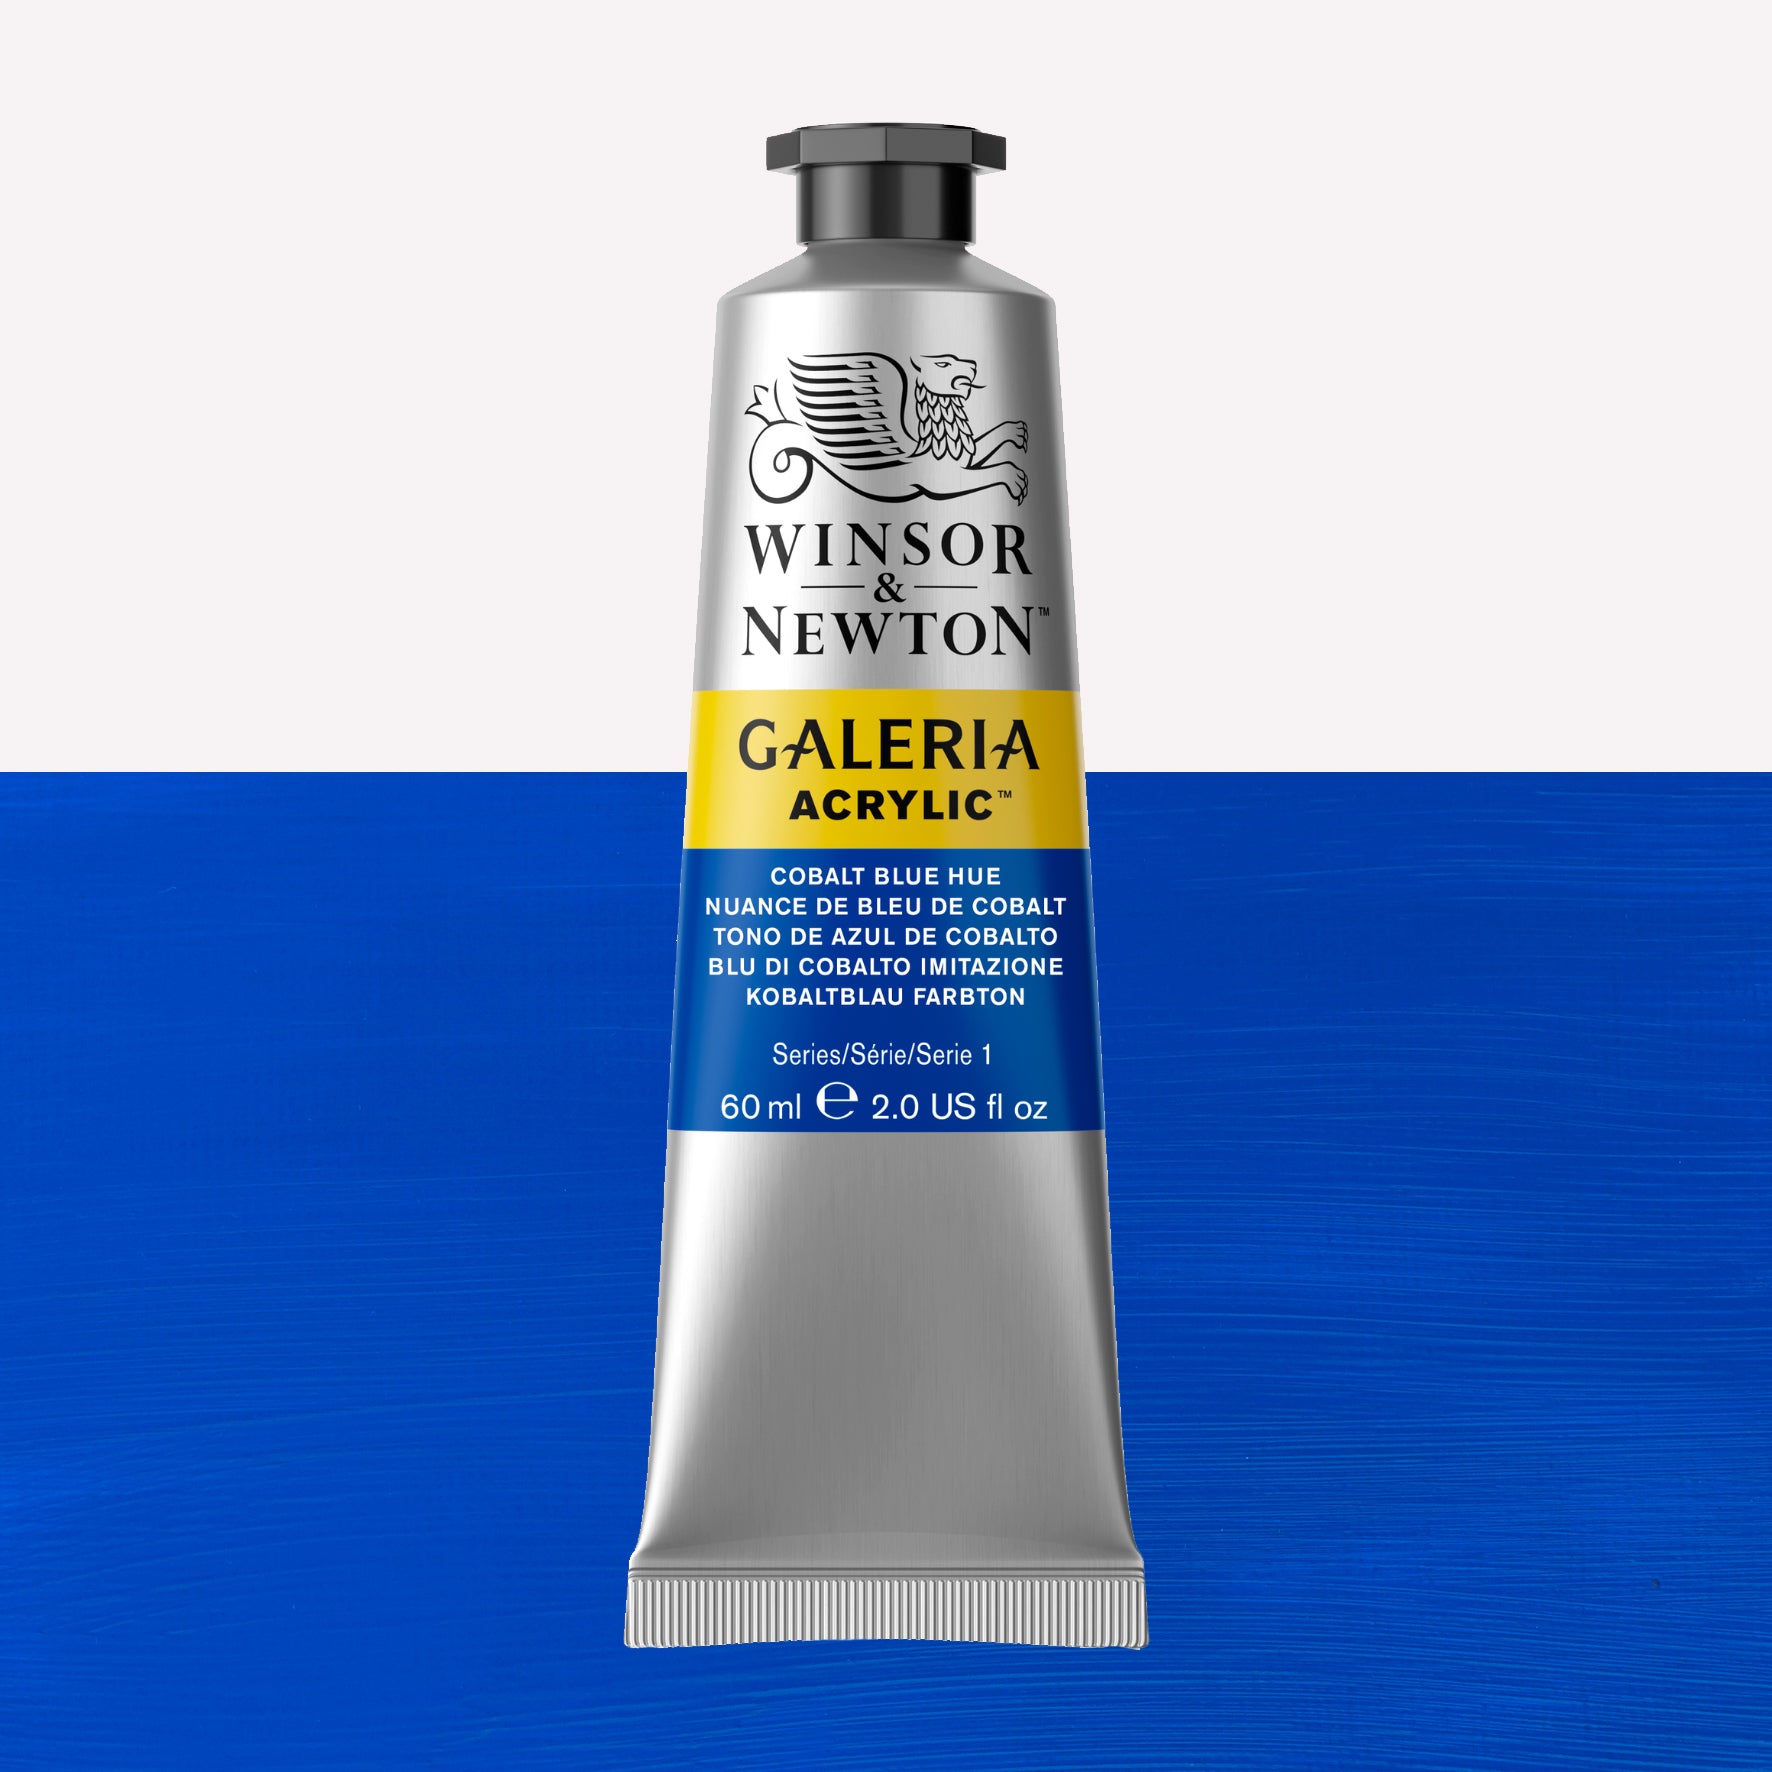 A 60ml tube of vibrant Galeria Acrylic paint in the shade Cobalt Blue Hue. This professional-quality paint is packaged in a silver tube with a black lid. Made by Winsor and Newton.